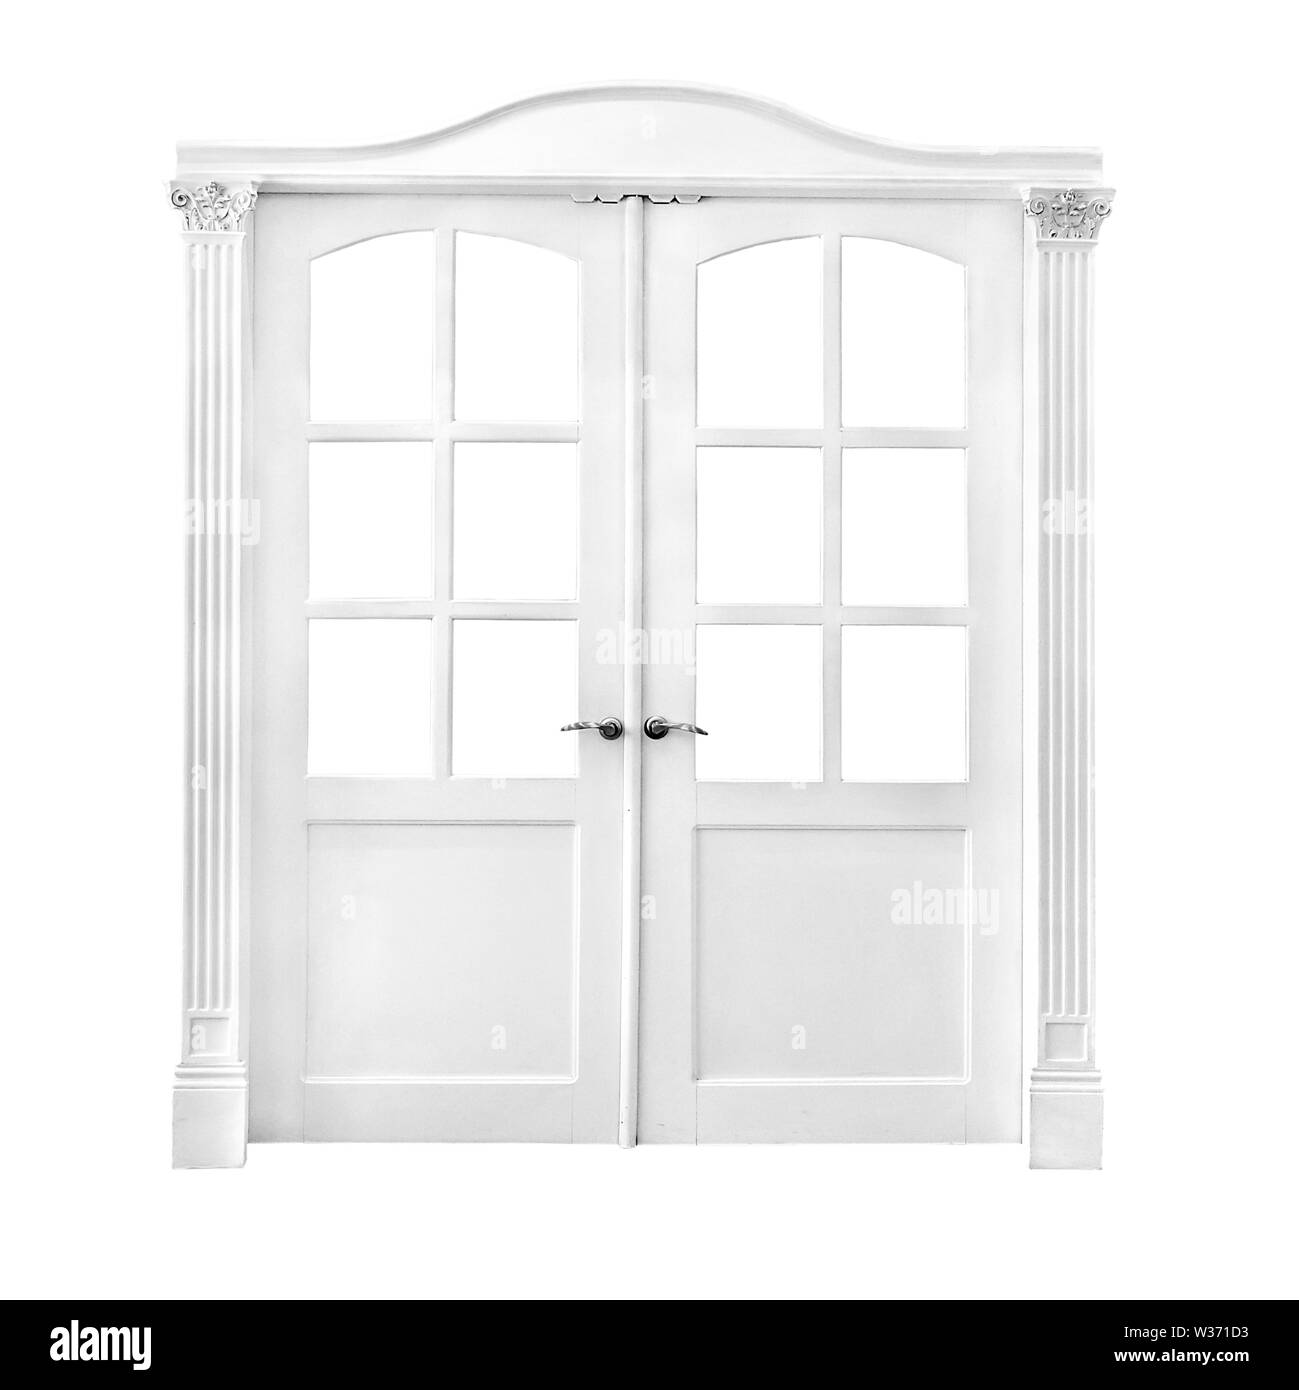 white double-leafed door of classical design isolated on white background Stock Photo